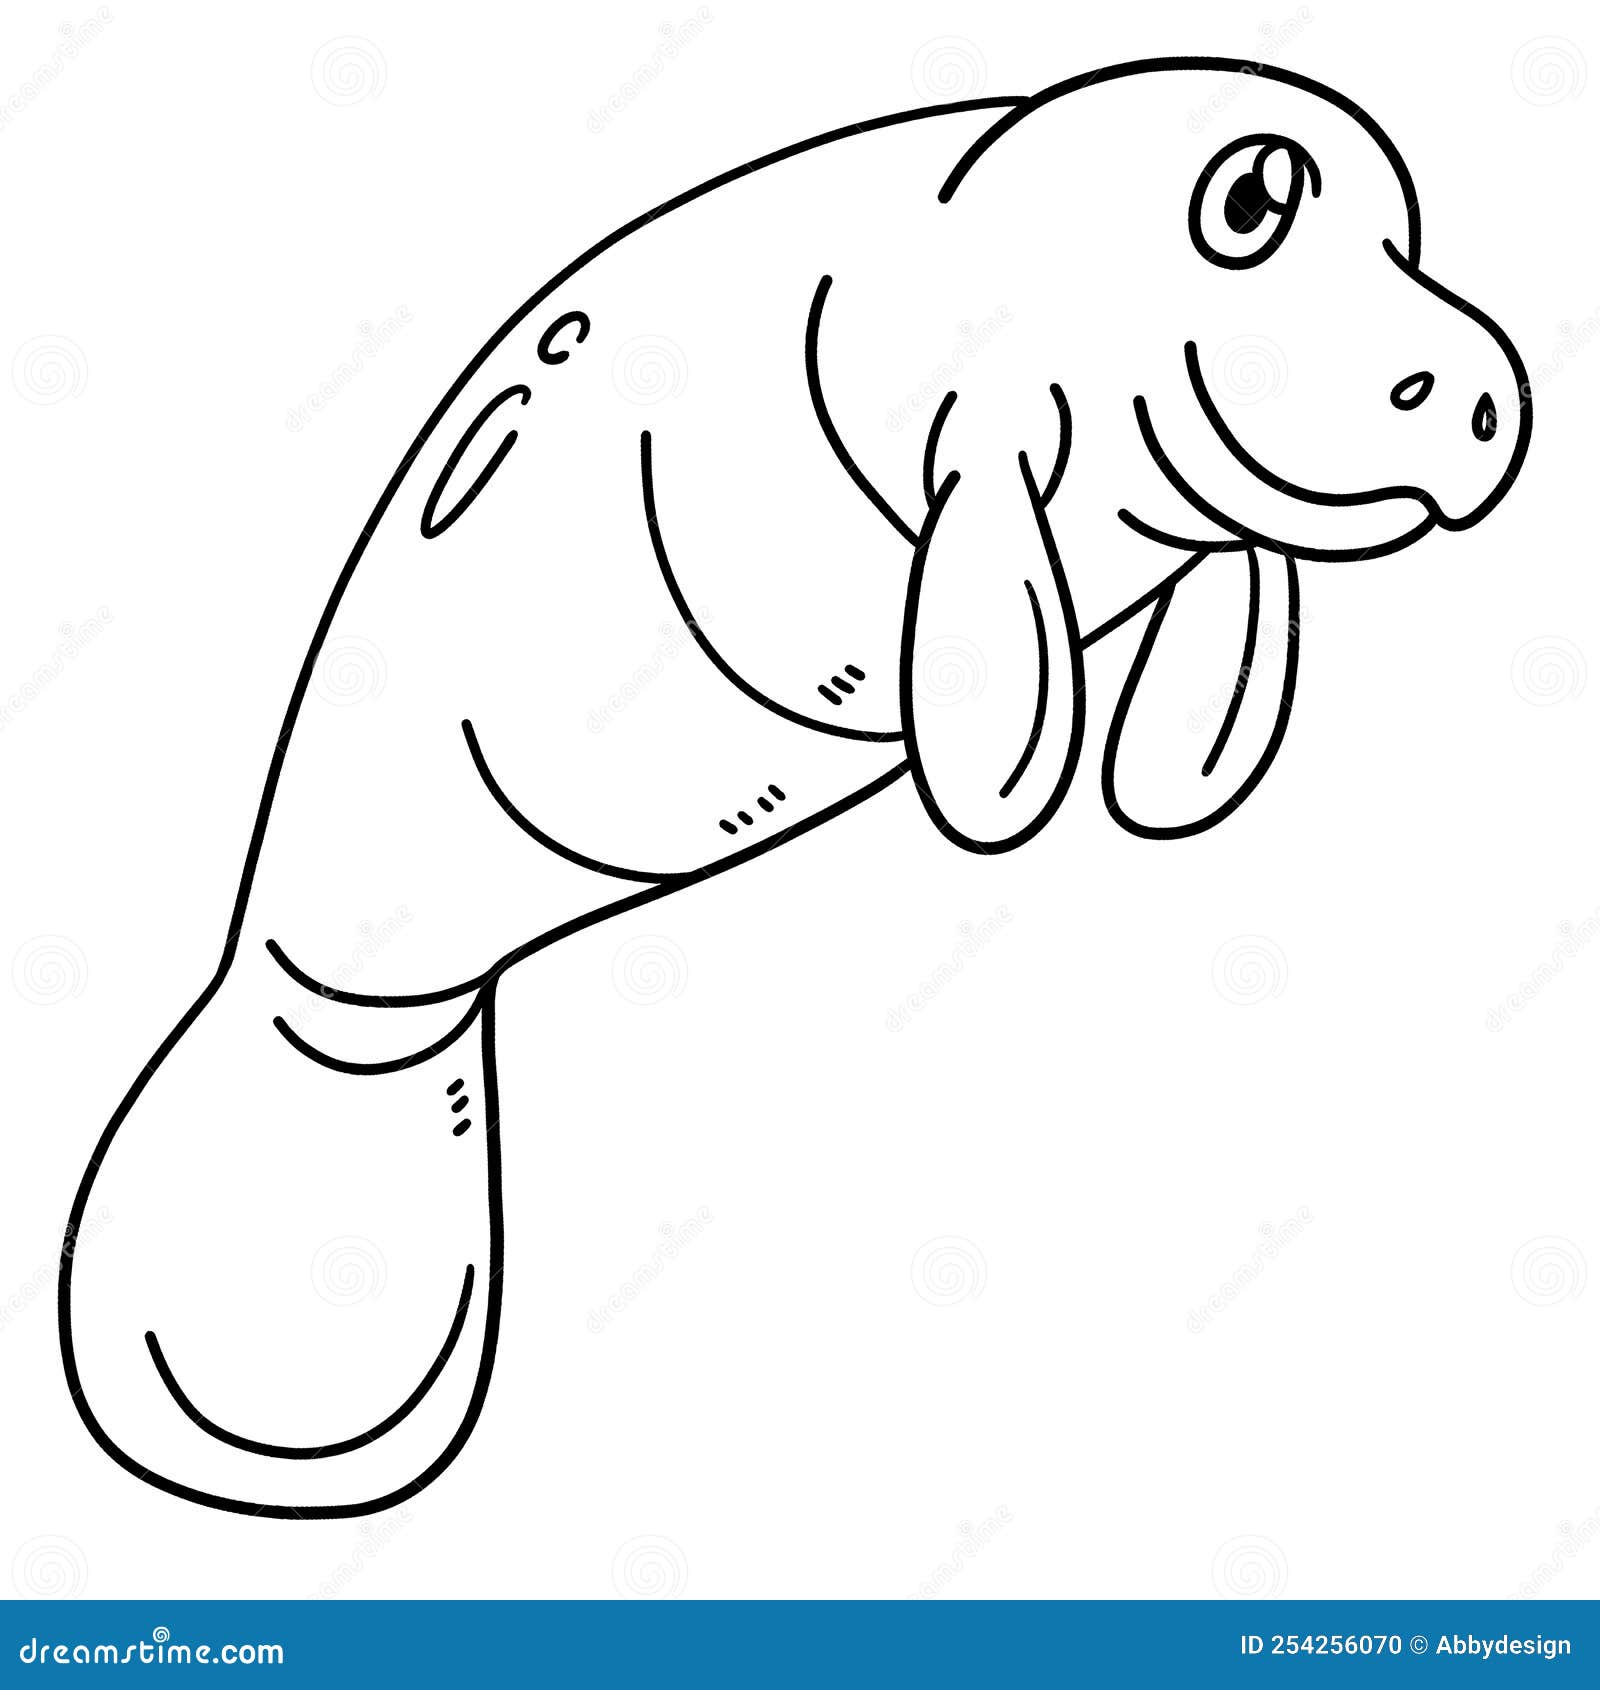 Manatee isolated coloring page for kids stock vector